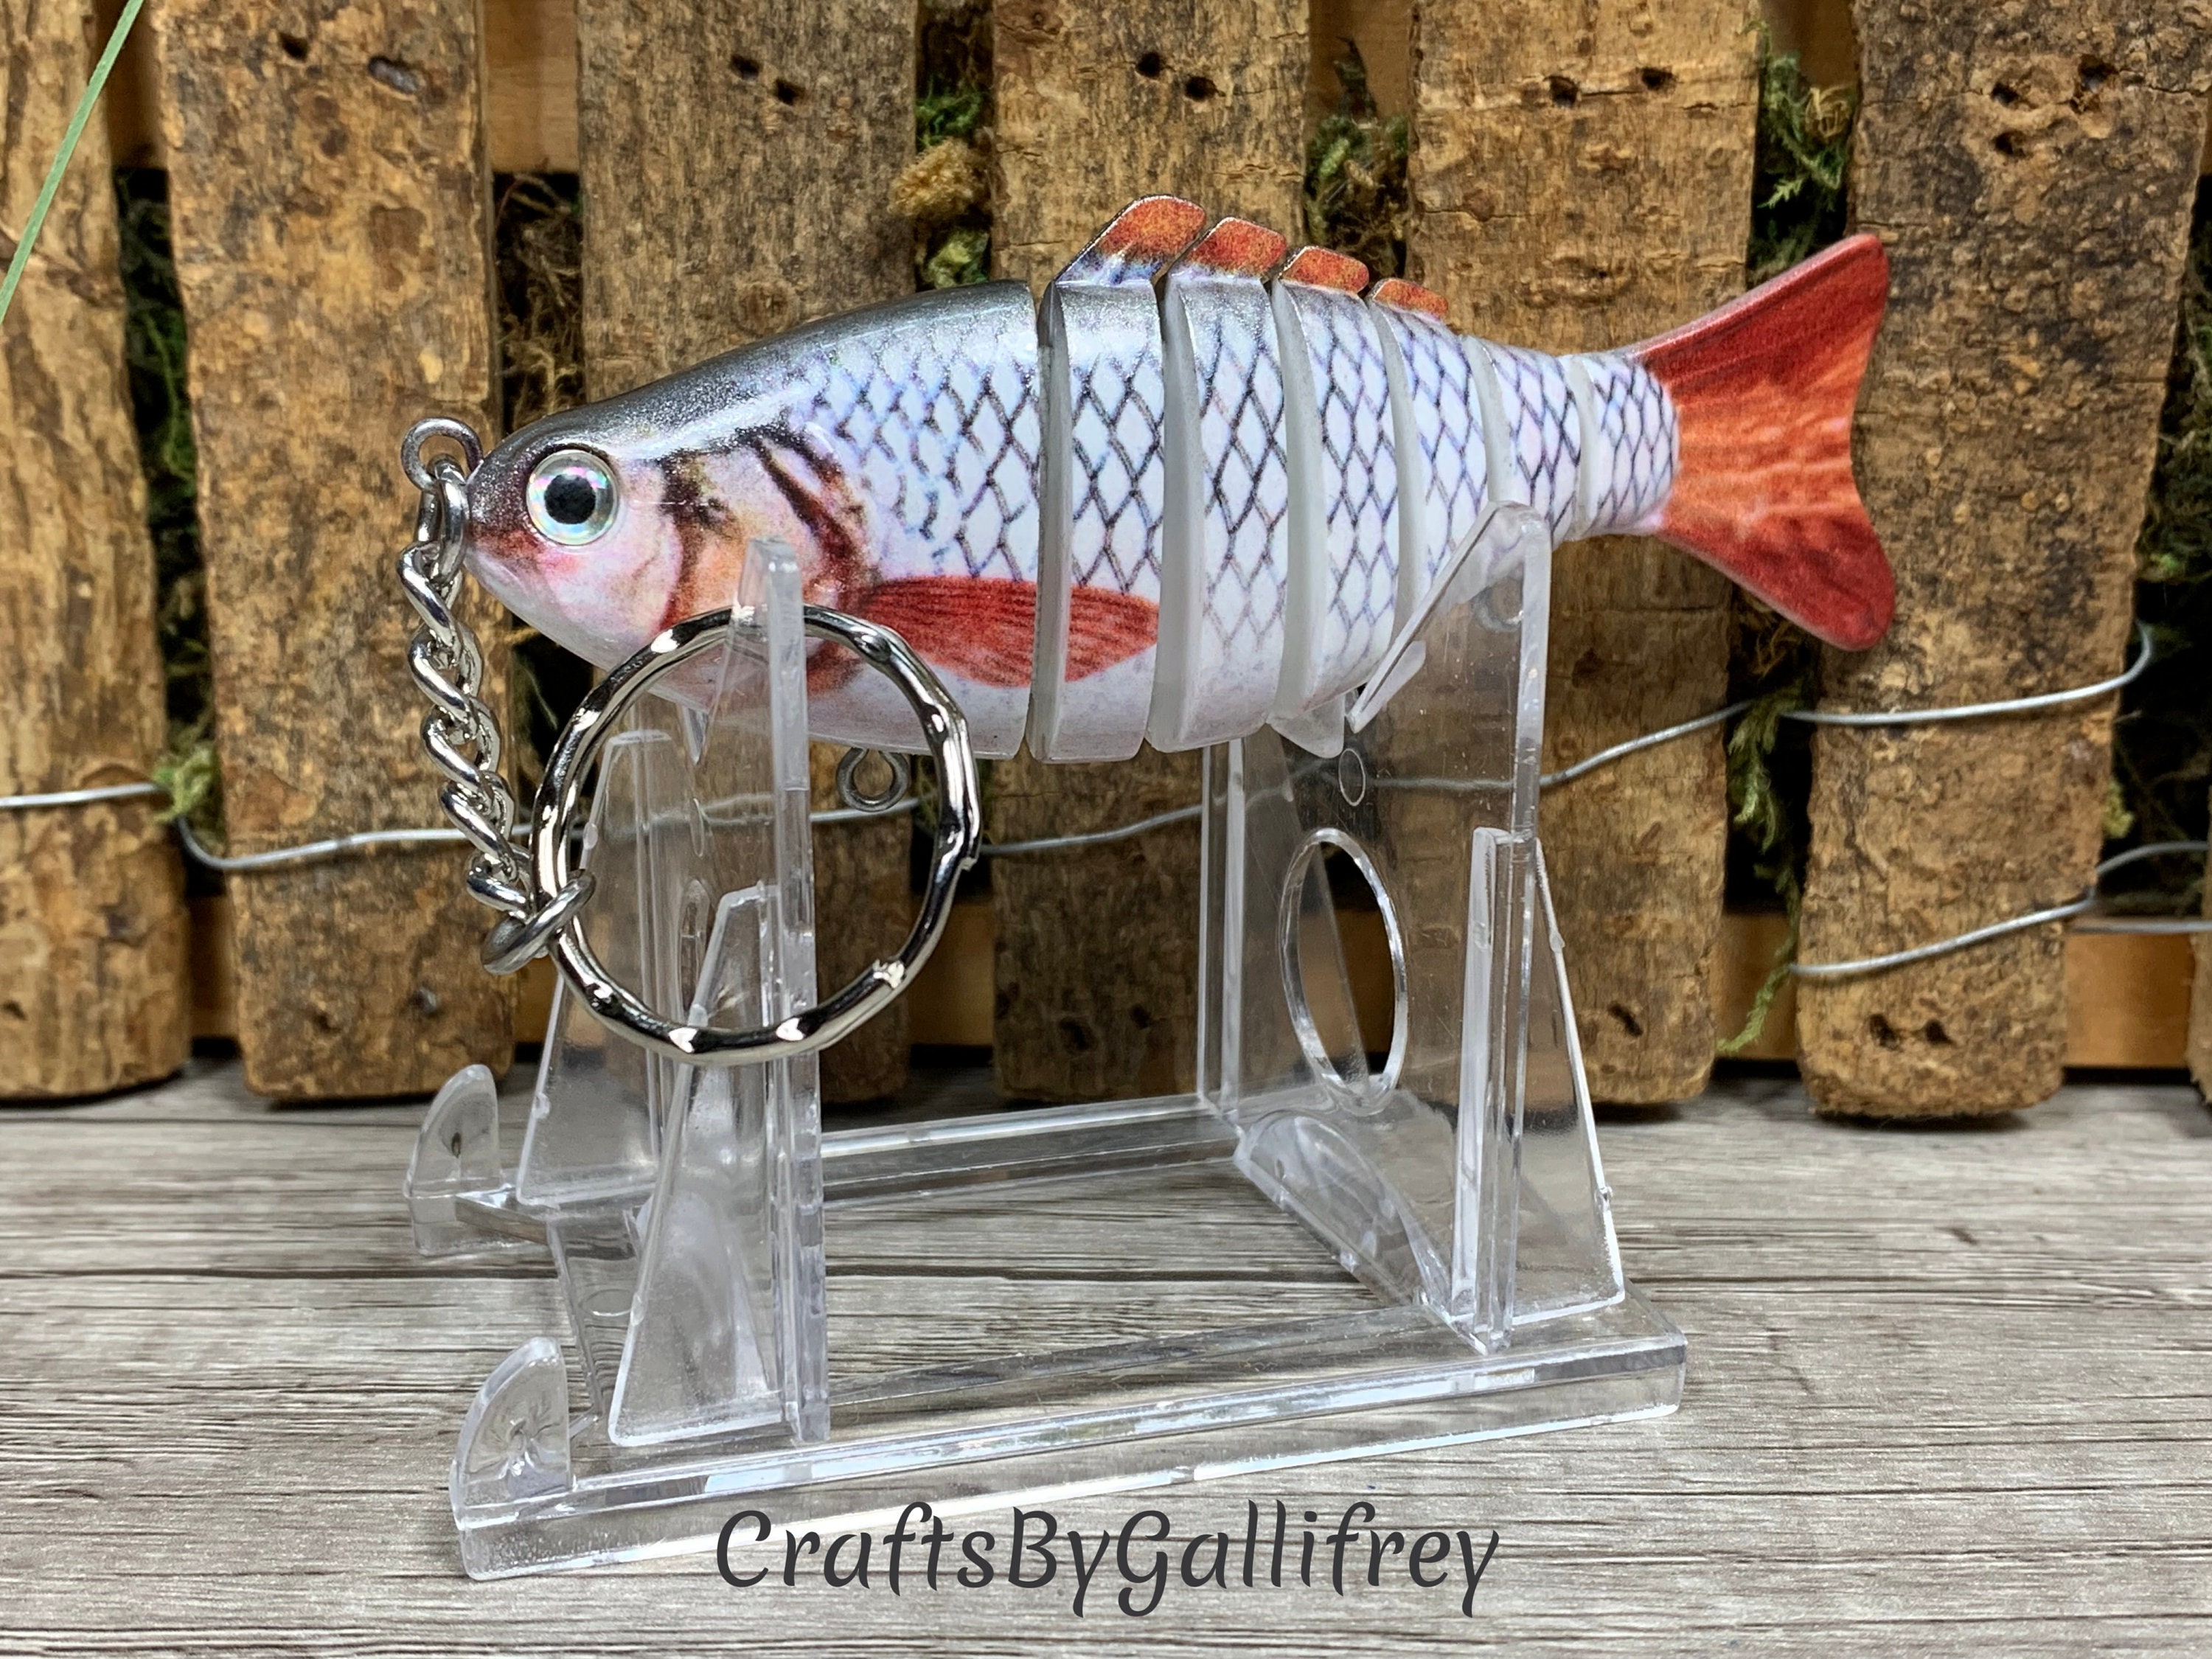 Father's Day Gift From Baby to New Dad Gift From Family Fathers Day Key  Ring Best Catch Fishing Lure Birth Announcement Baby's Weight Height 